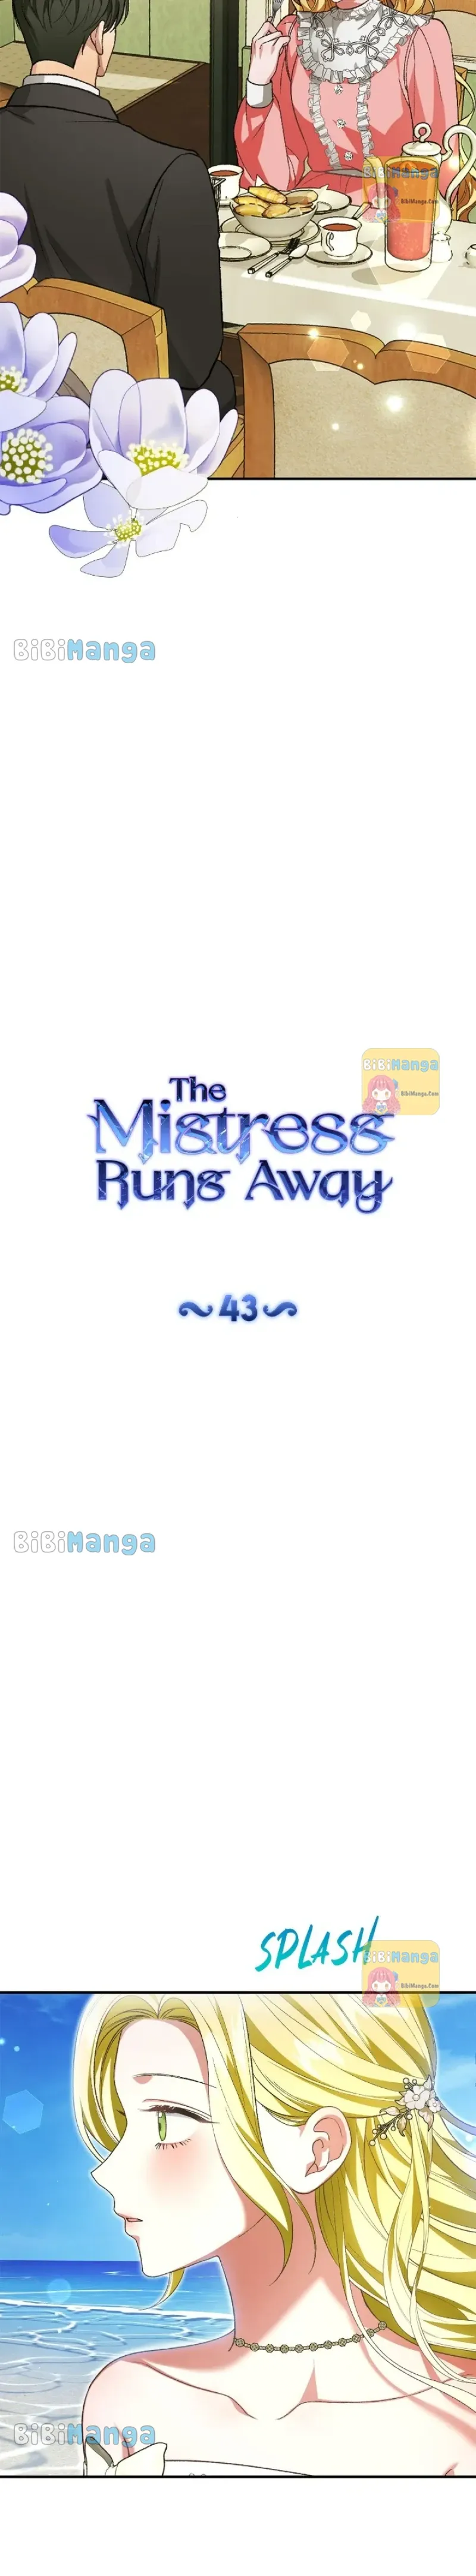 The Mistress Runs Away Chapter 43 page 7